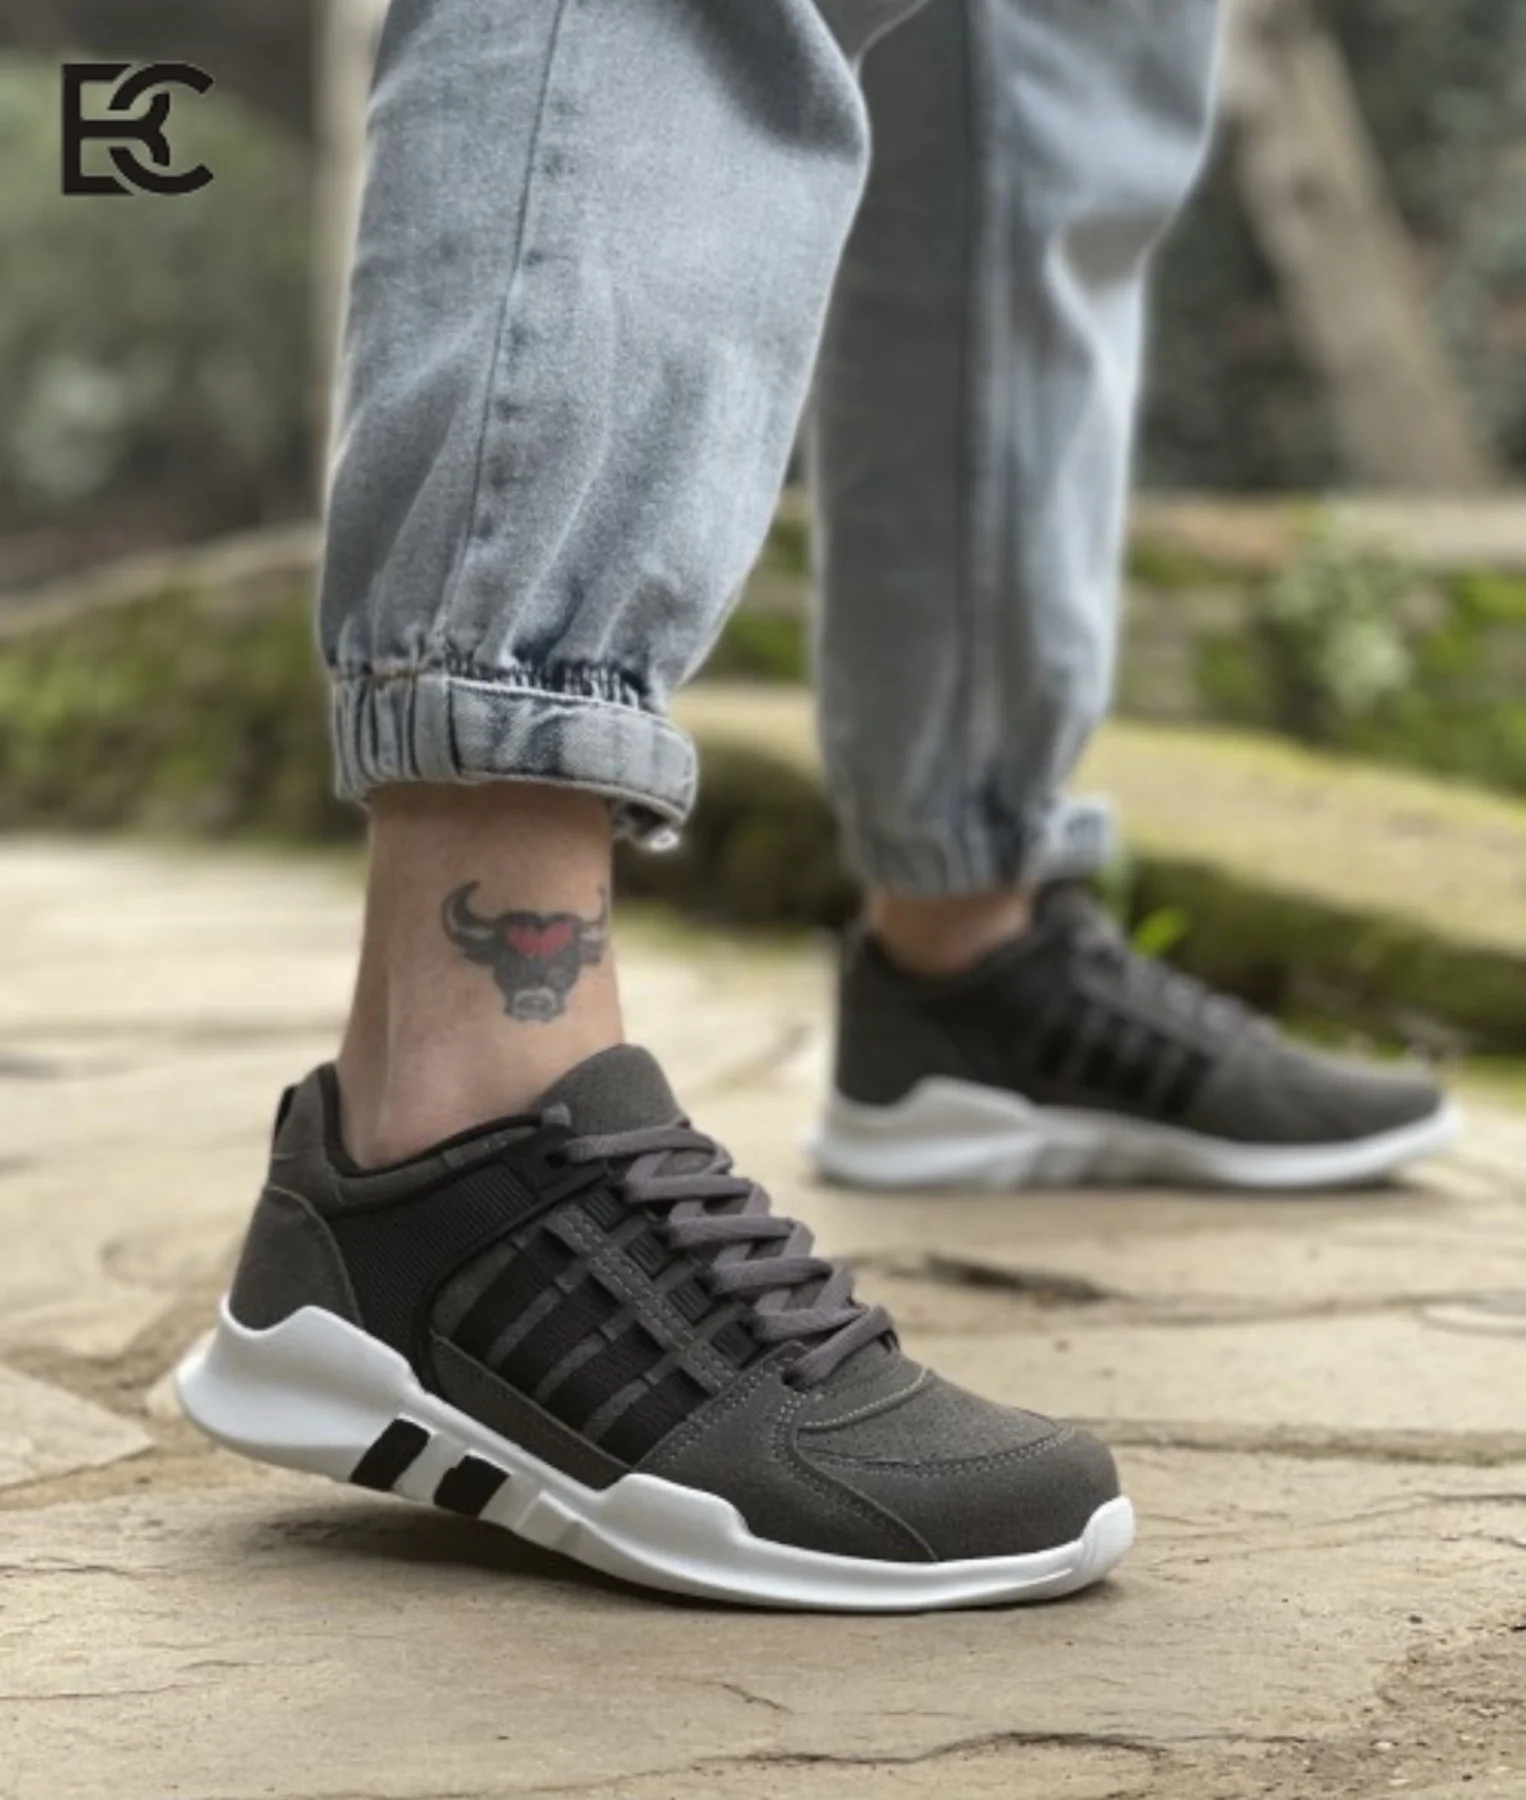 Summer Men 'S Sports Shoes Knitwear Breathable Tennis Men 'S Sneakers Man Casual Hiking Shoes Big Size Casual Men 'S Shoes